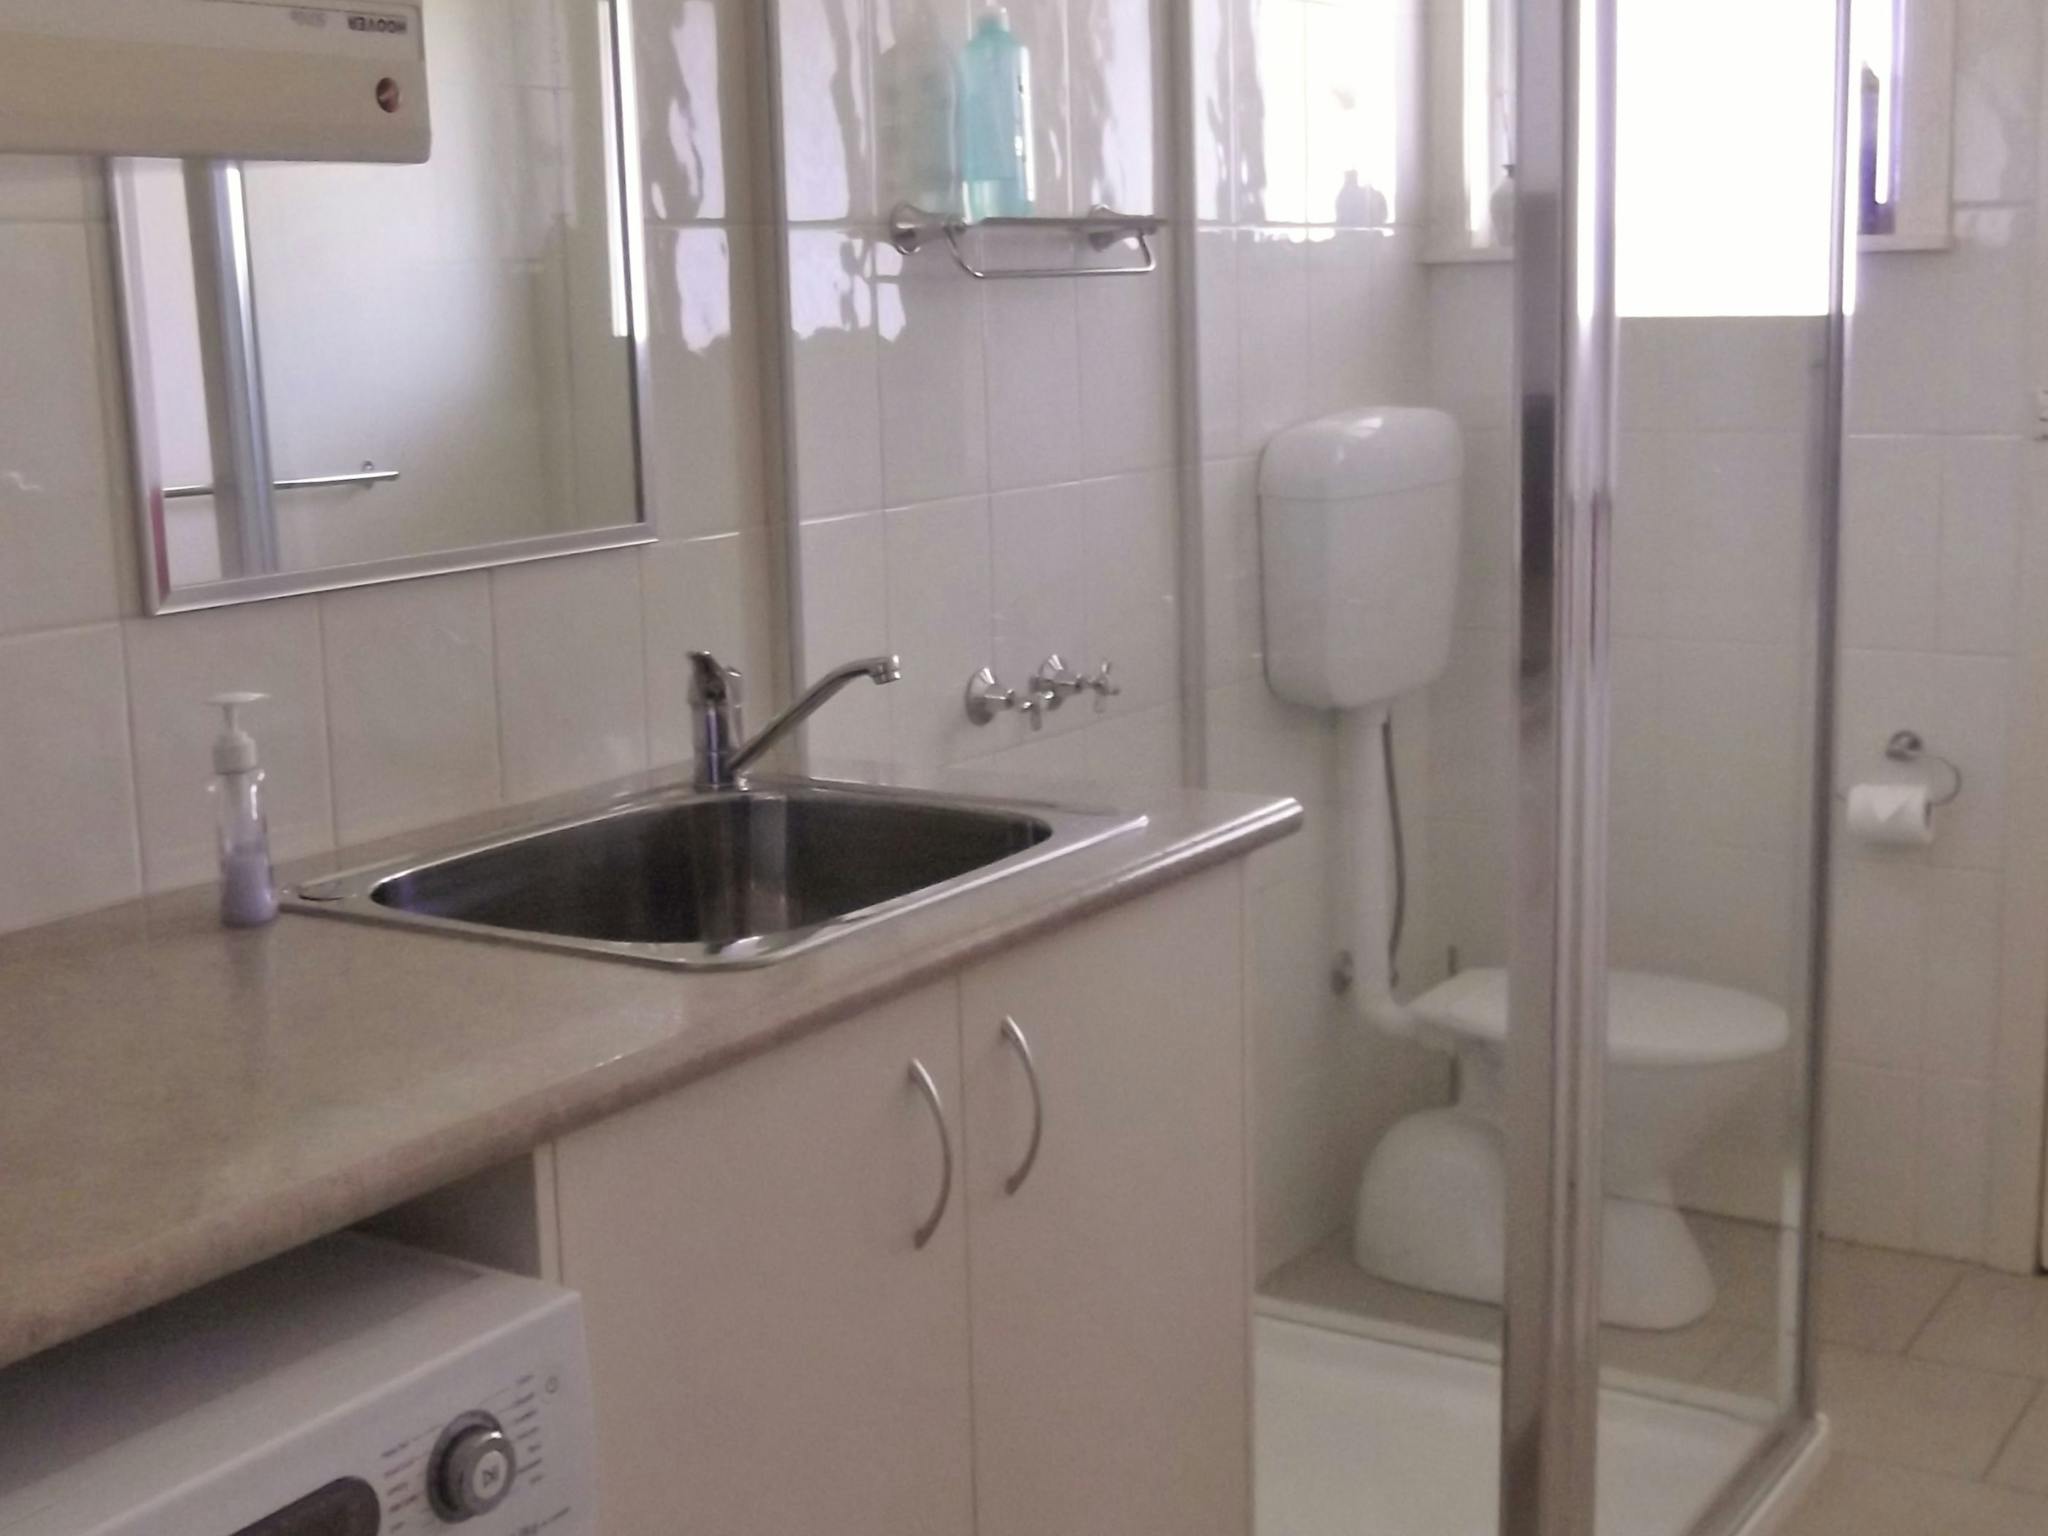 2nd bathroom/laundry with shower, toilet and laundry trough with washing machine and dryer